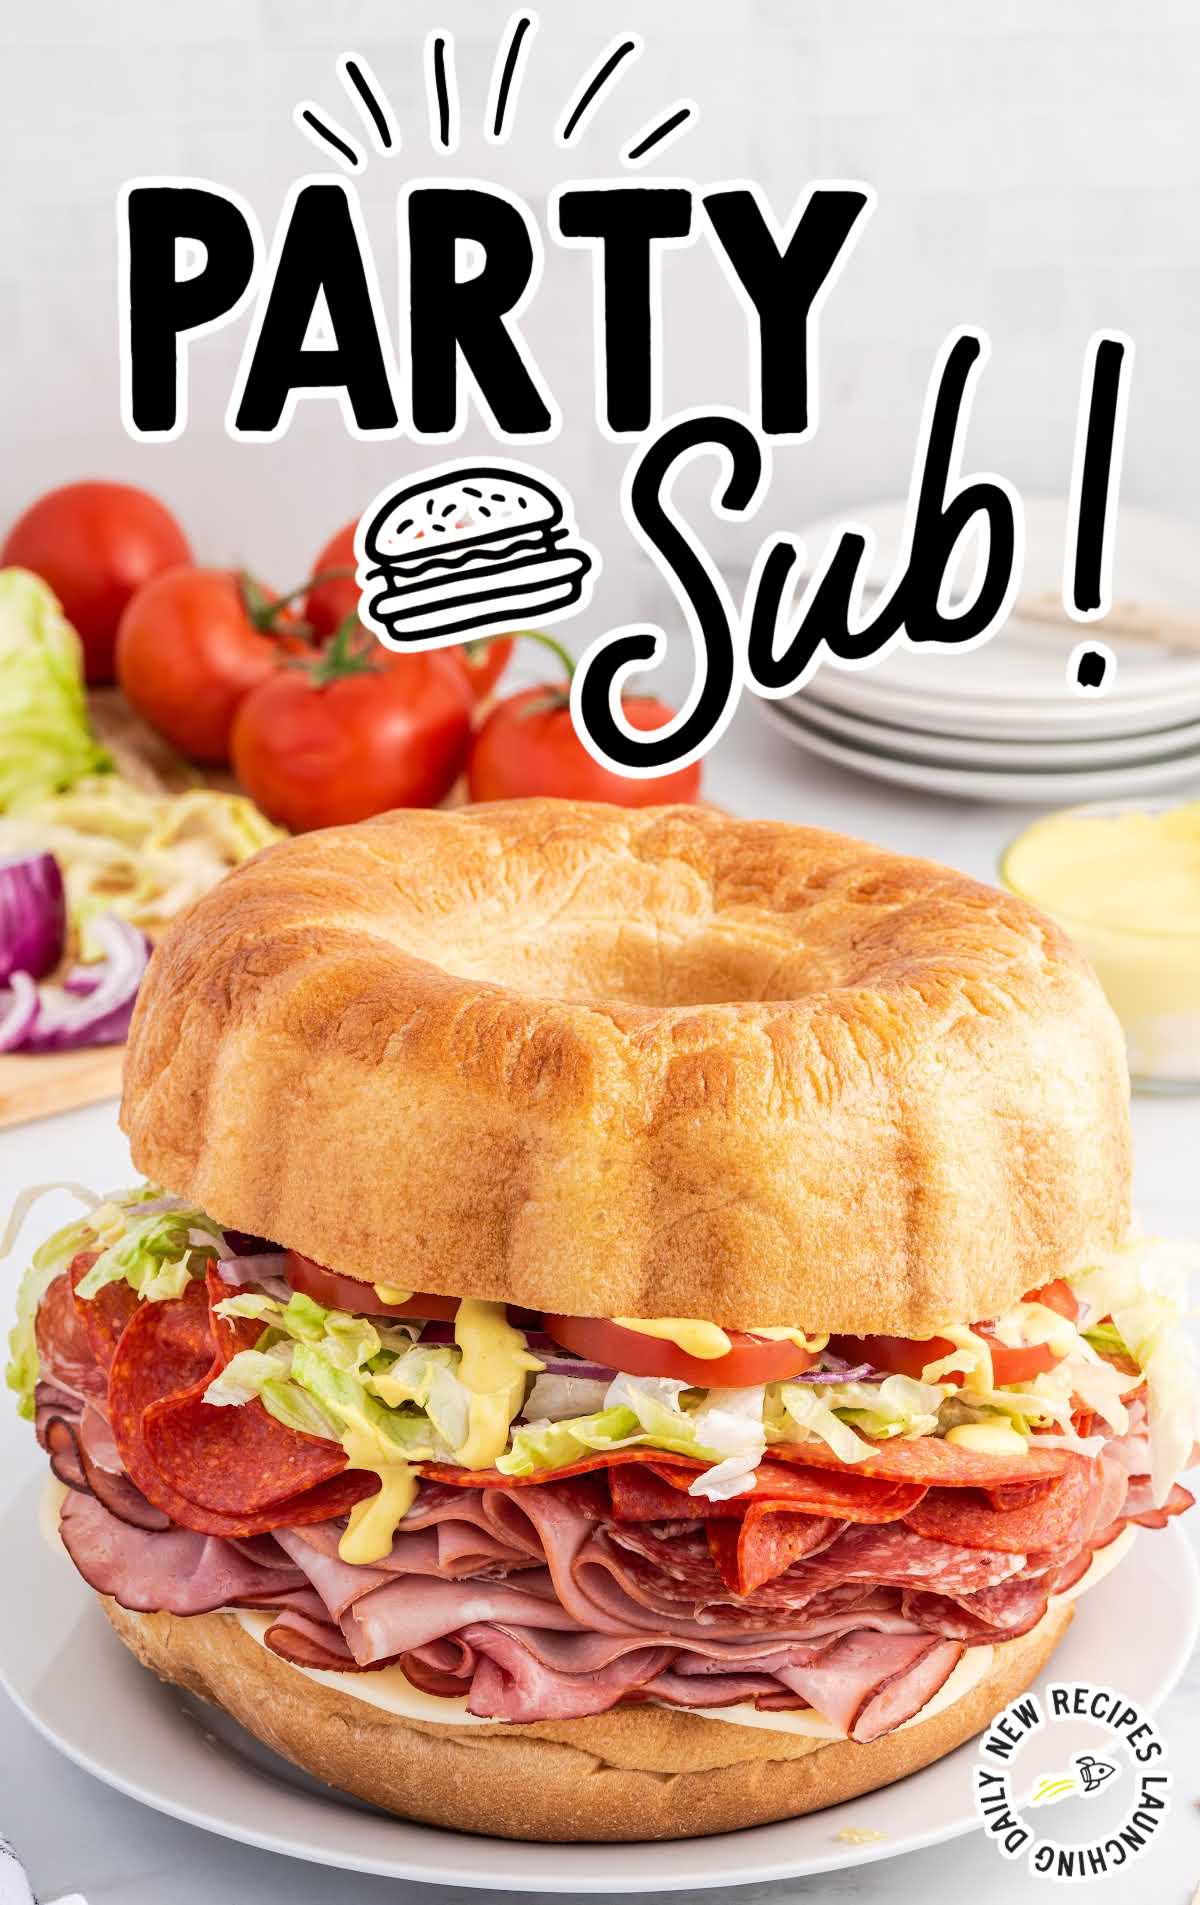 close up shot of a whole Party Sub on a plate